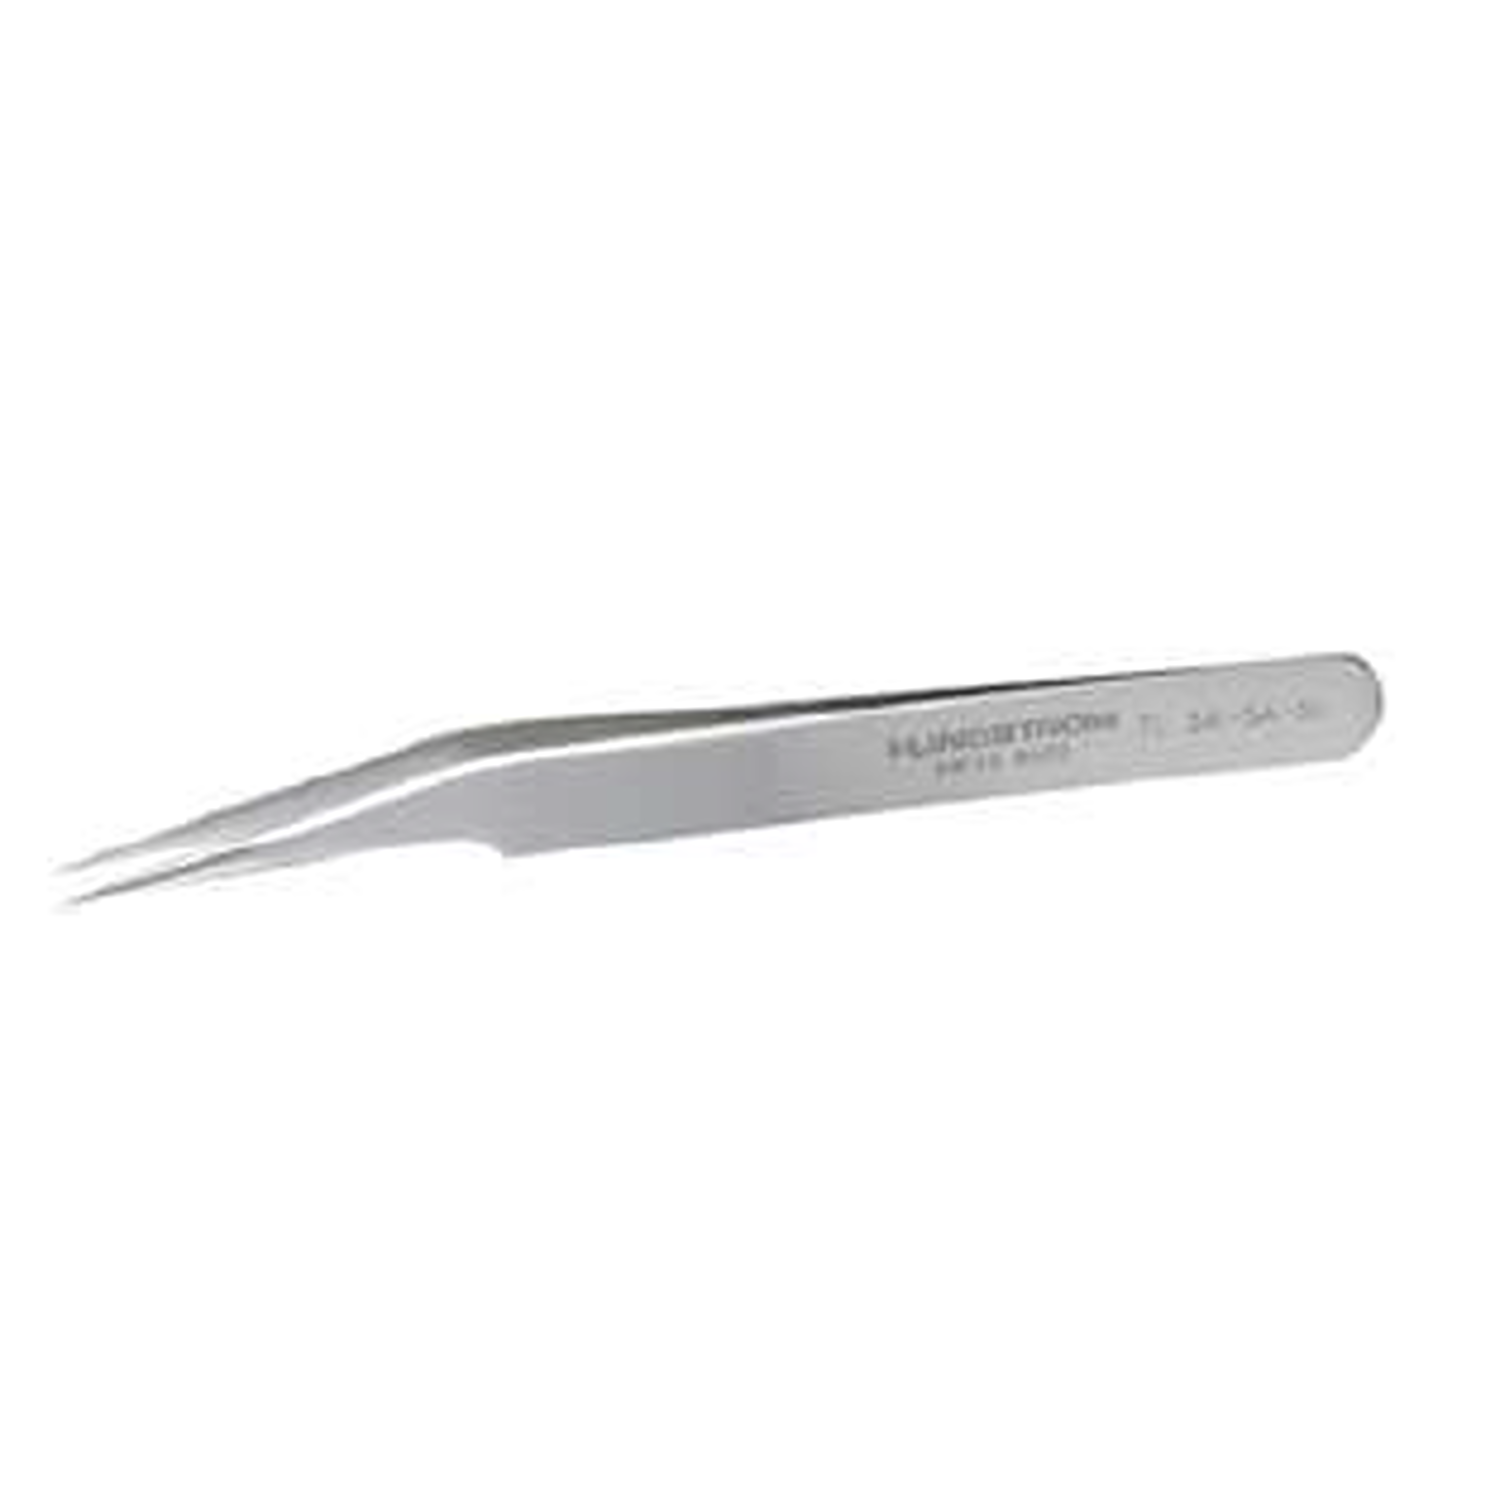 BAHCO TL 5A-SA-SL Precision Industrial Tweezers with Extra Fine - Premium Tweezers from BAHCO - Shop now at Yew Aik.